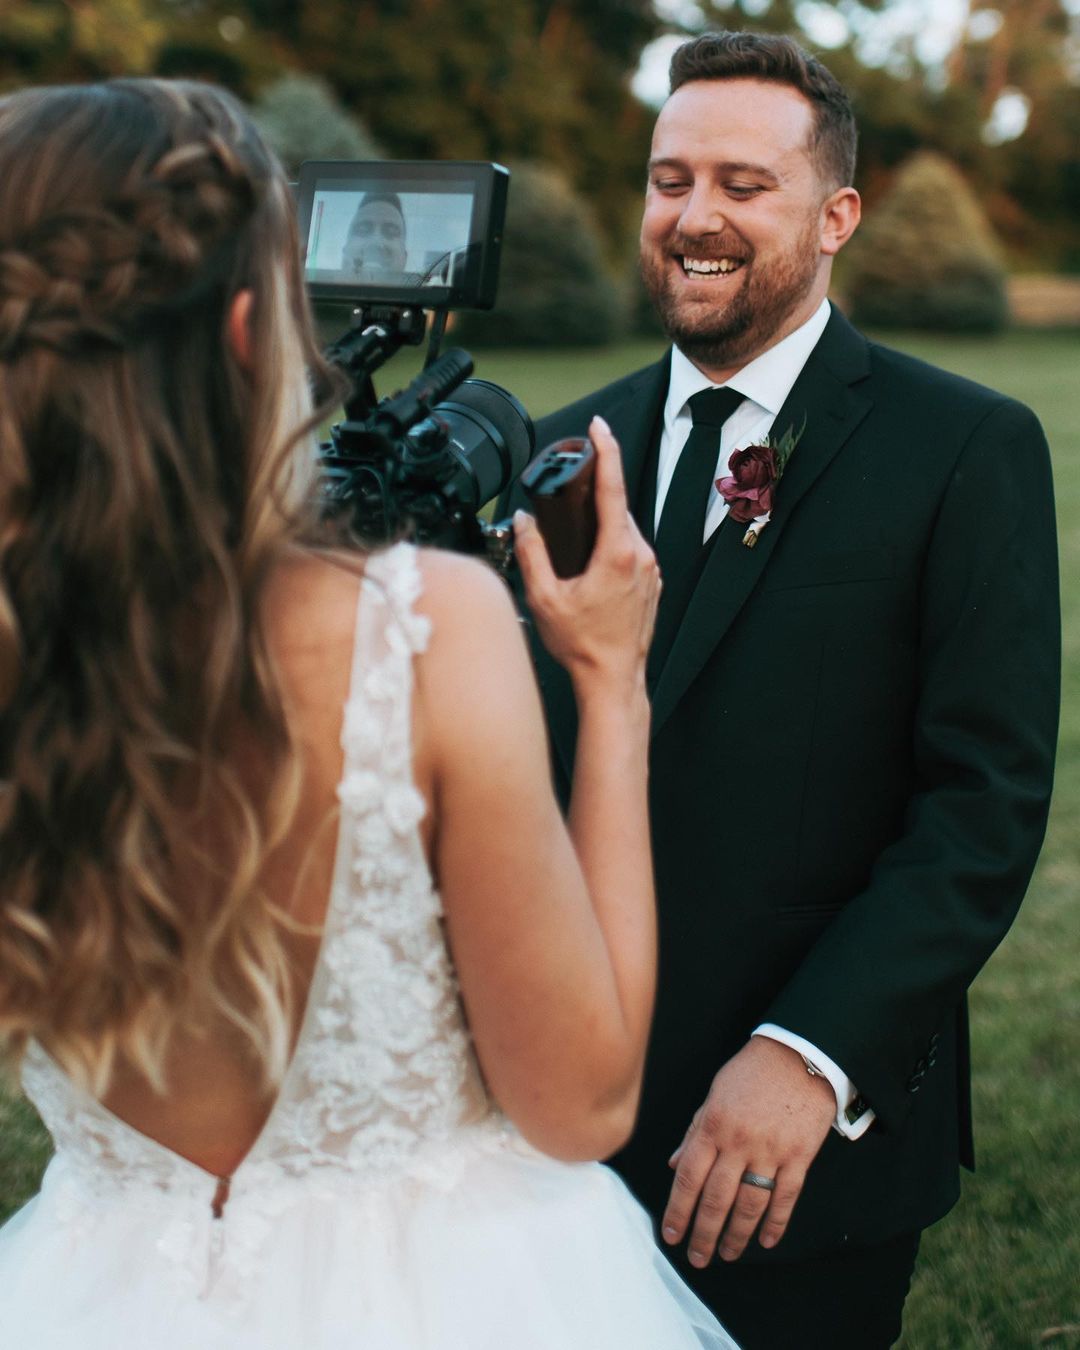 modern wedding vows for bride and groom unique ideas